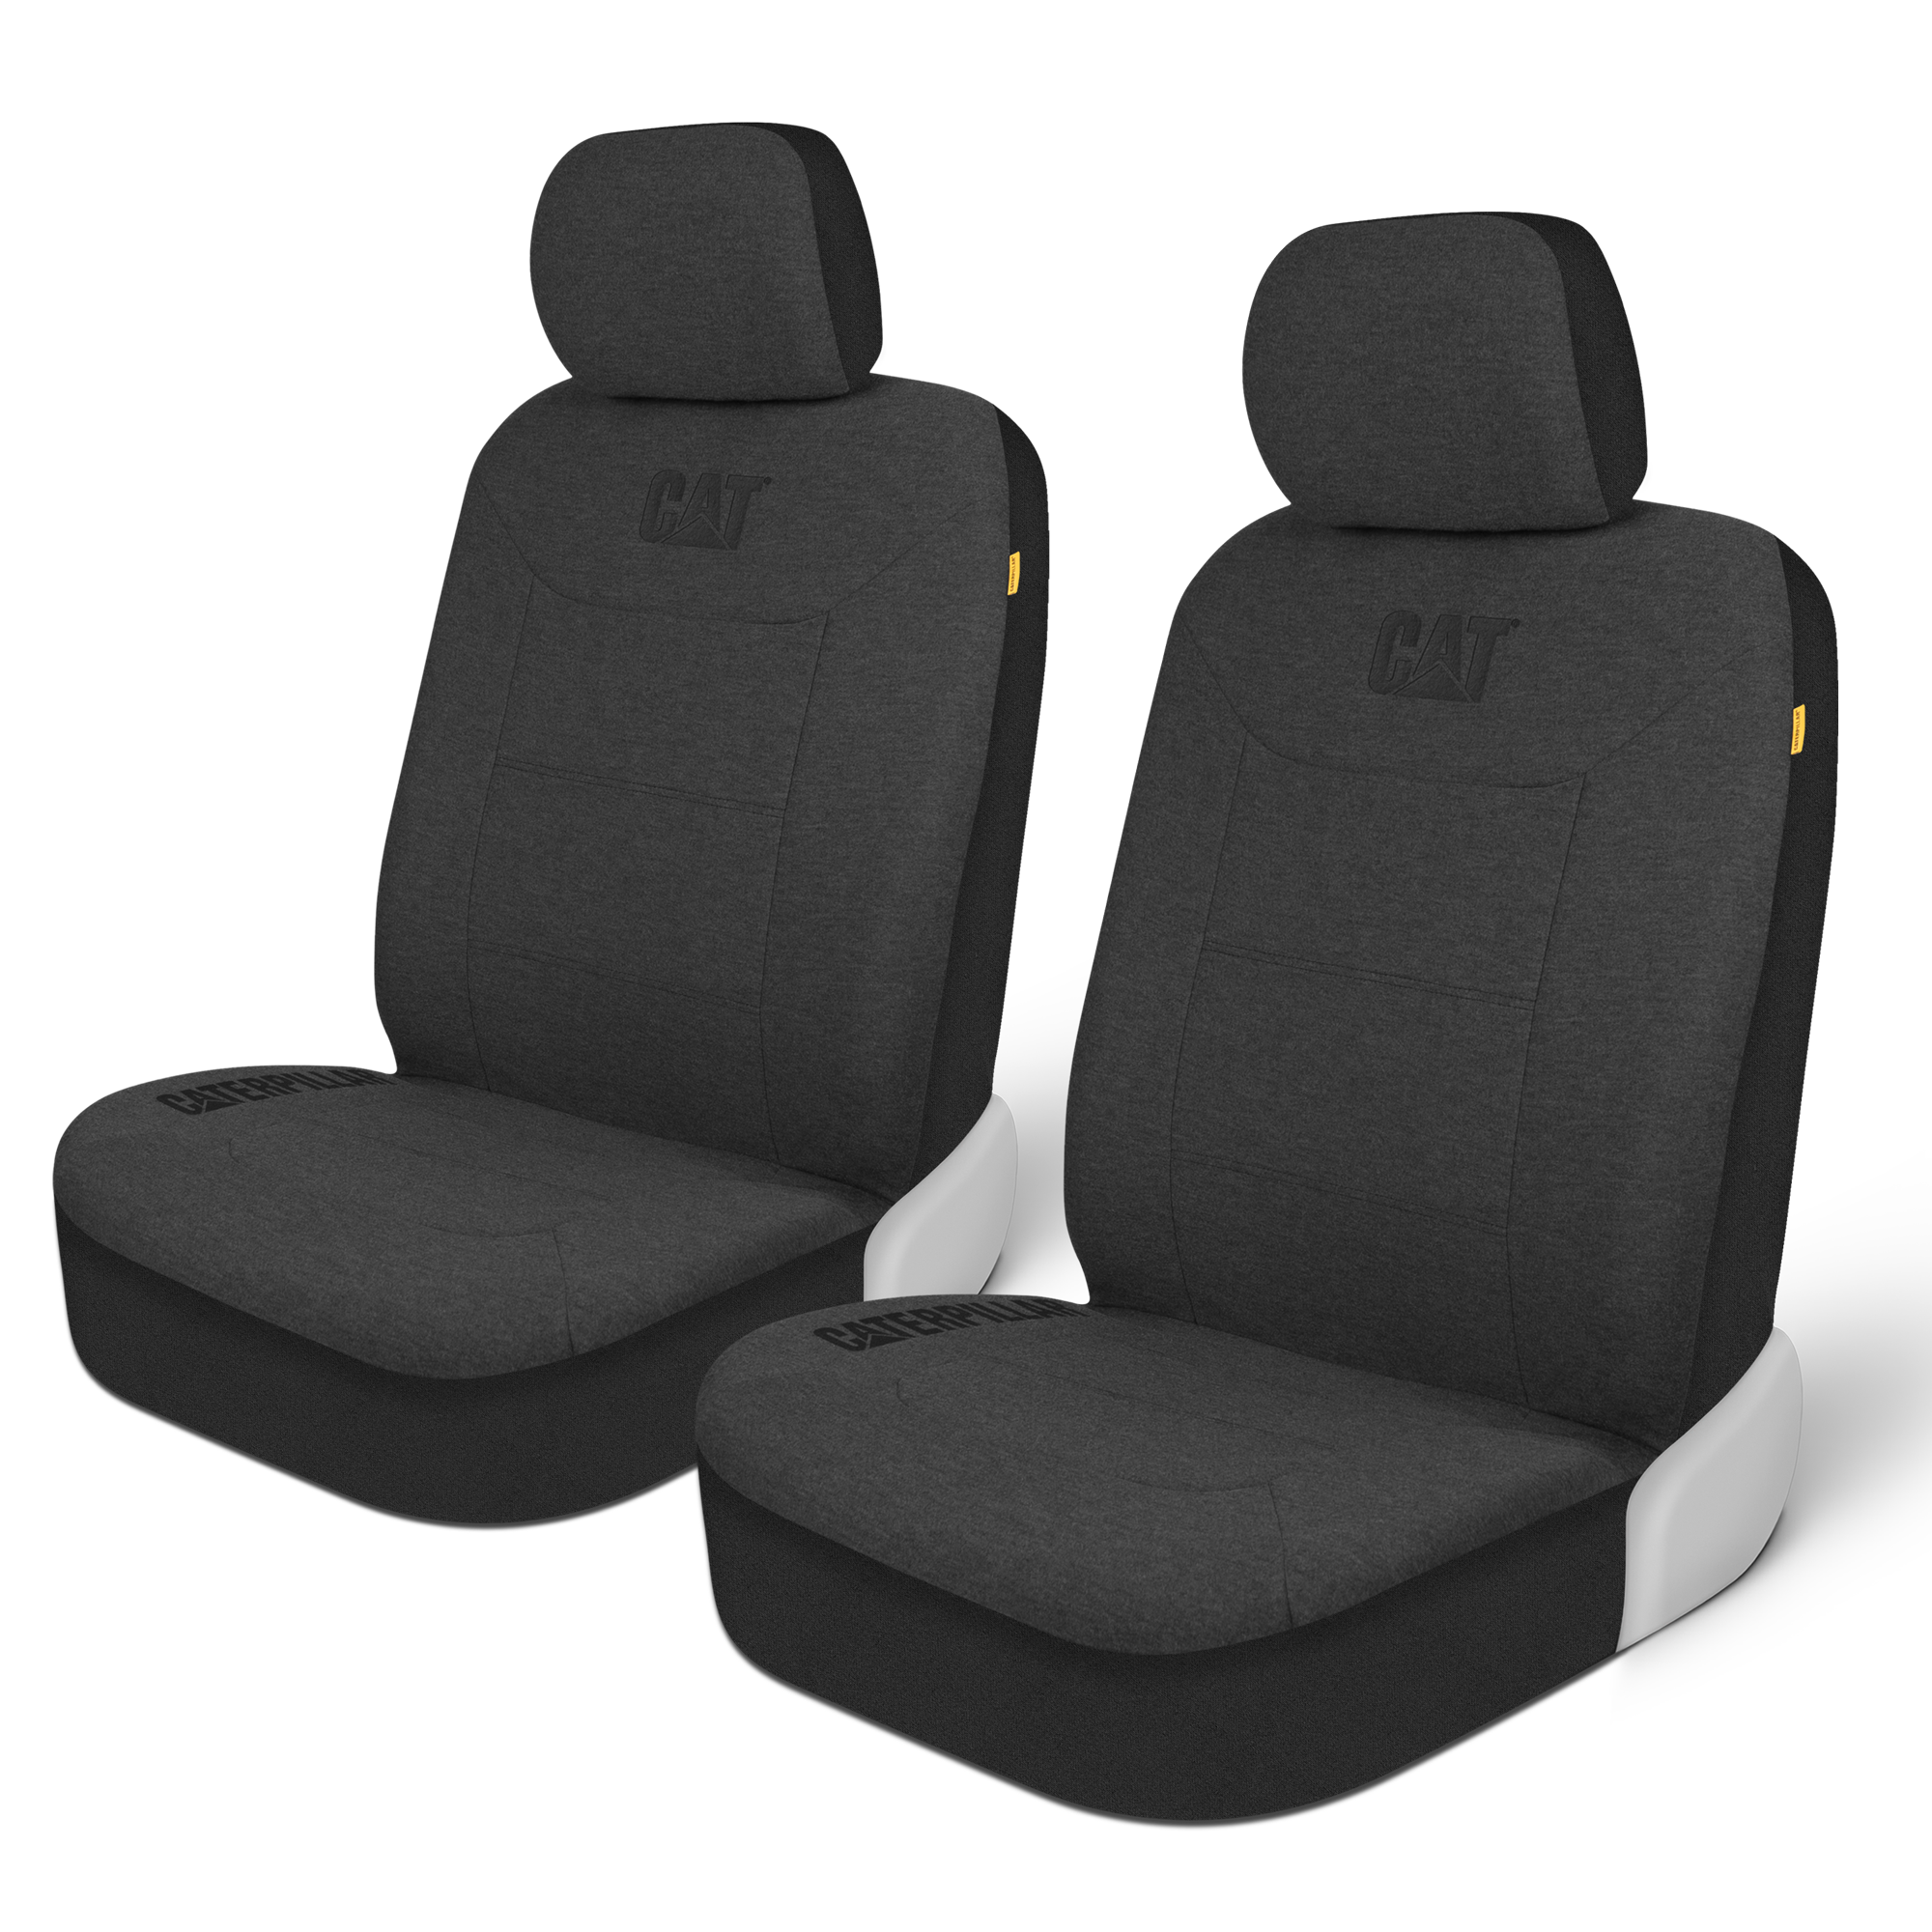 CAT 2-Pack CozyBlend JerseyHeather Front Seat Covers - Charcoal